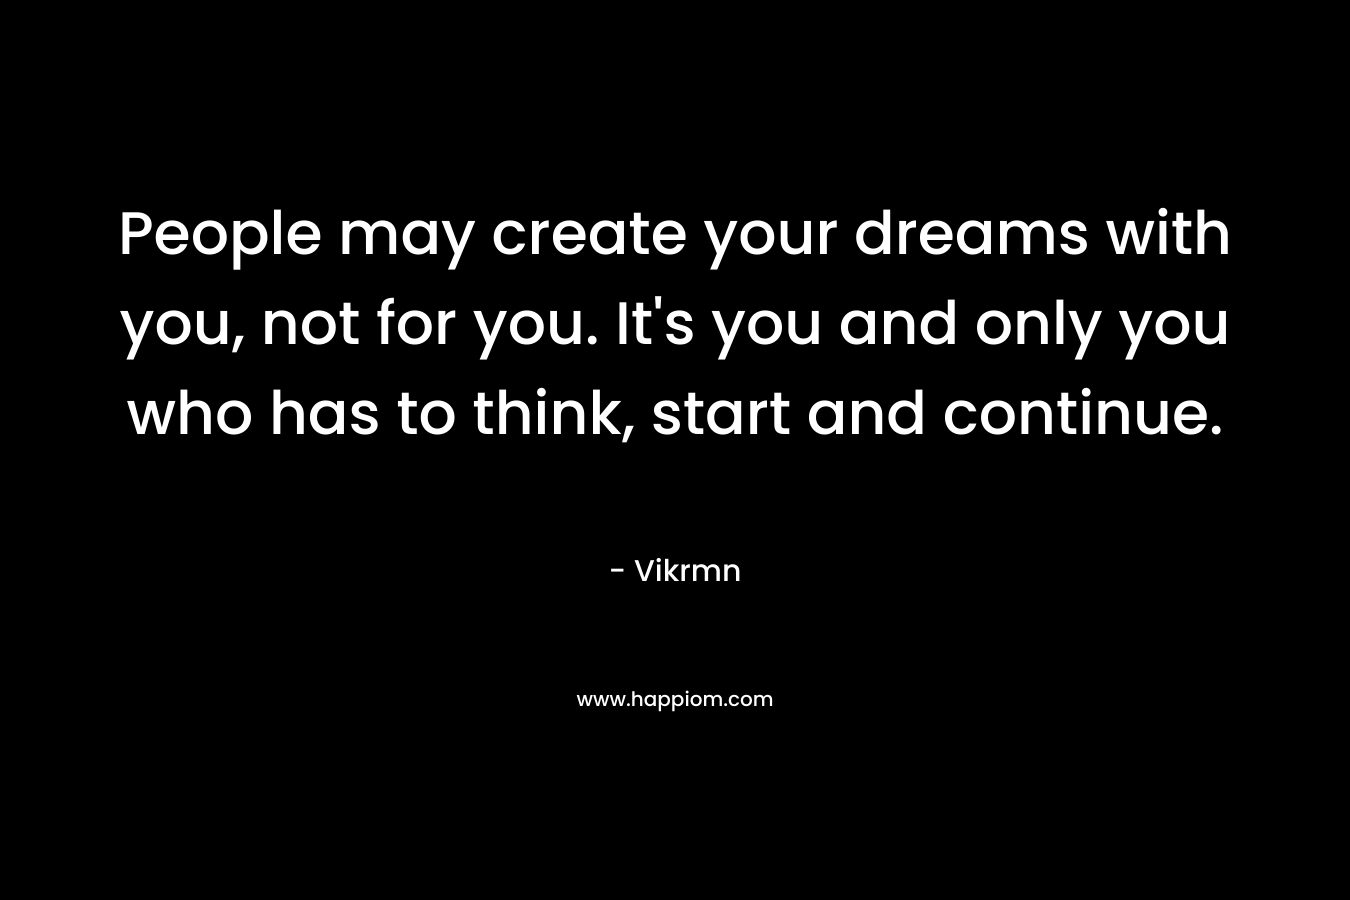 People may create your dreams with you, not for you. It's you and only you who has to think, start and continue.